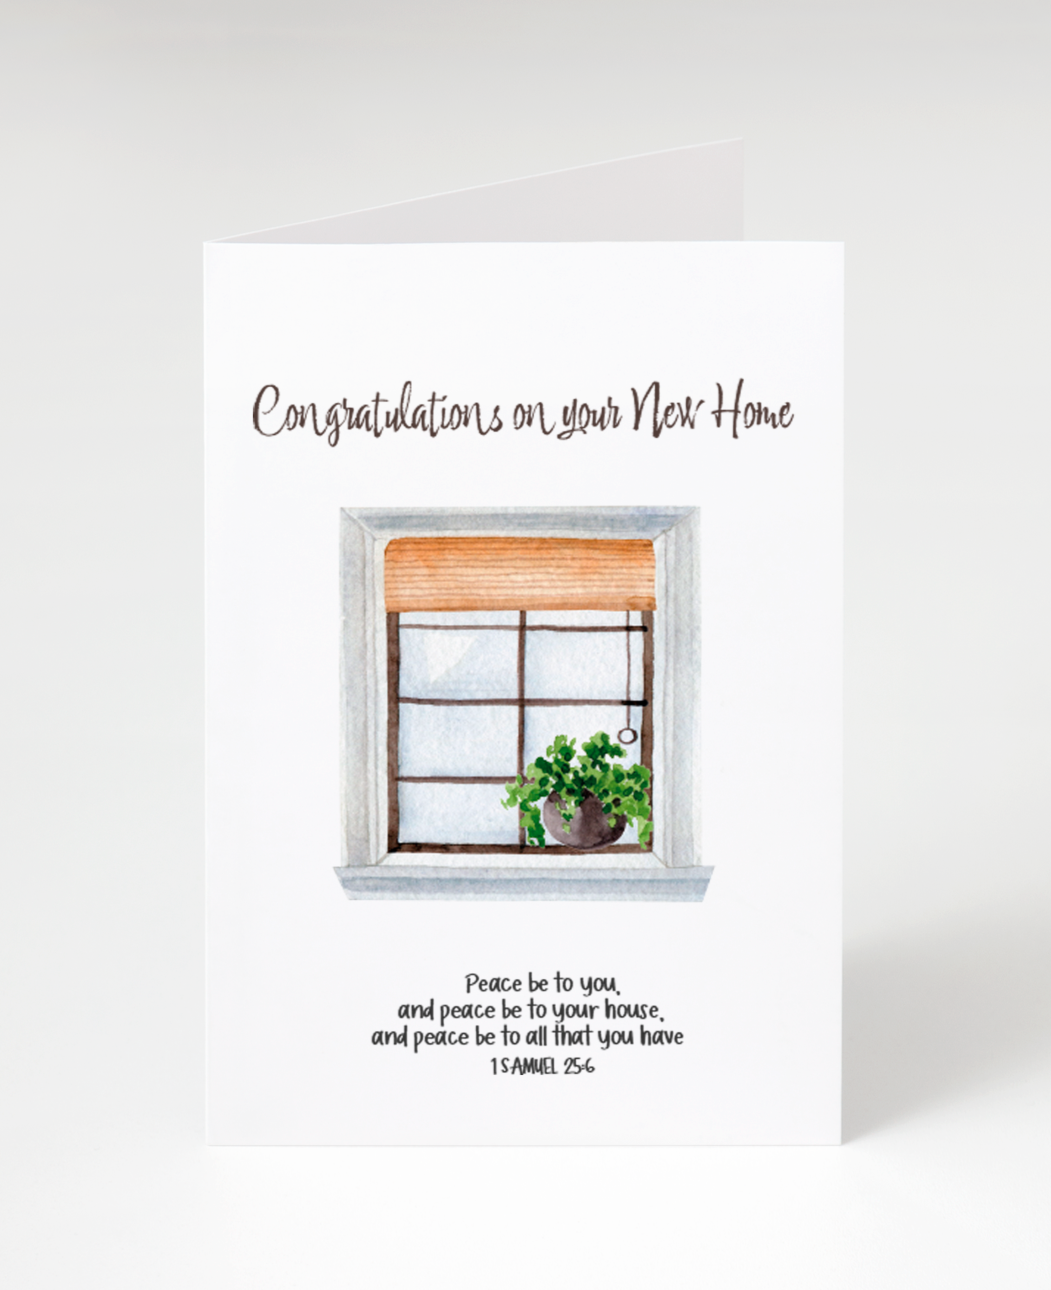 Congratulations on your new home - 1 Samuel 25:6 card